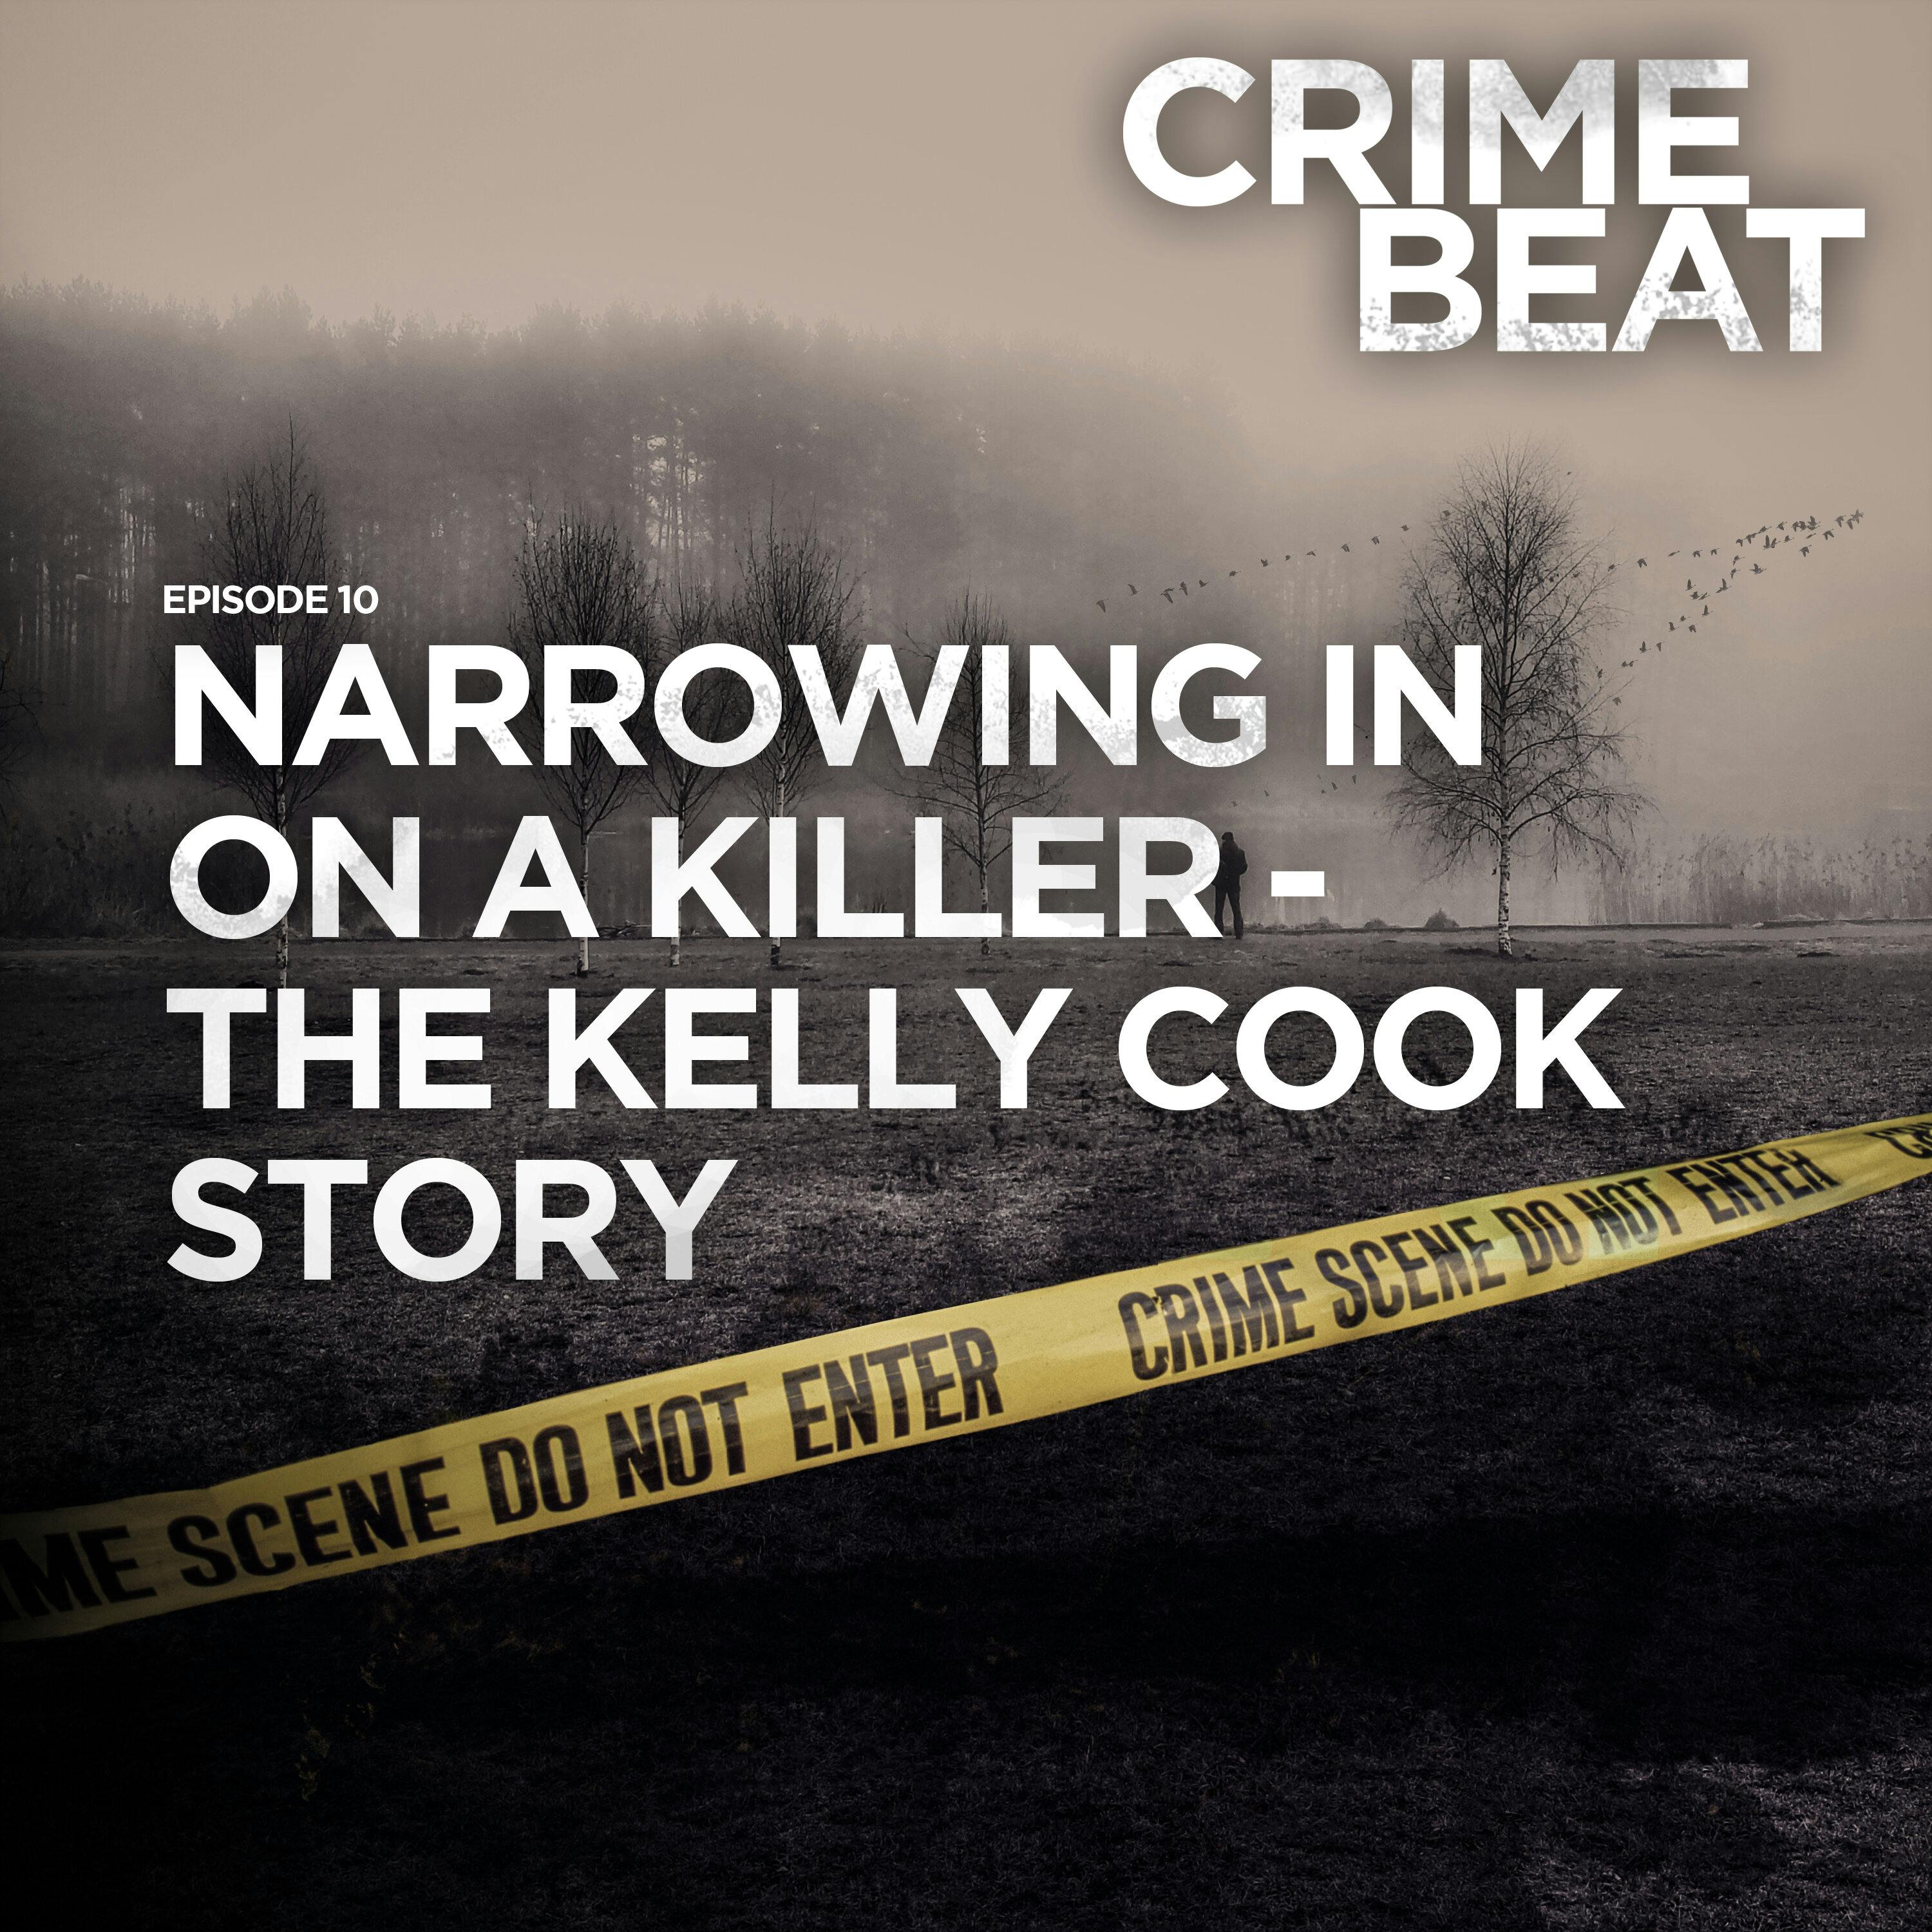 Narrowing in on a killer - The Kelly Cook Story |10